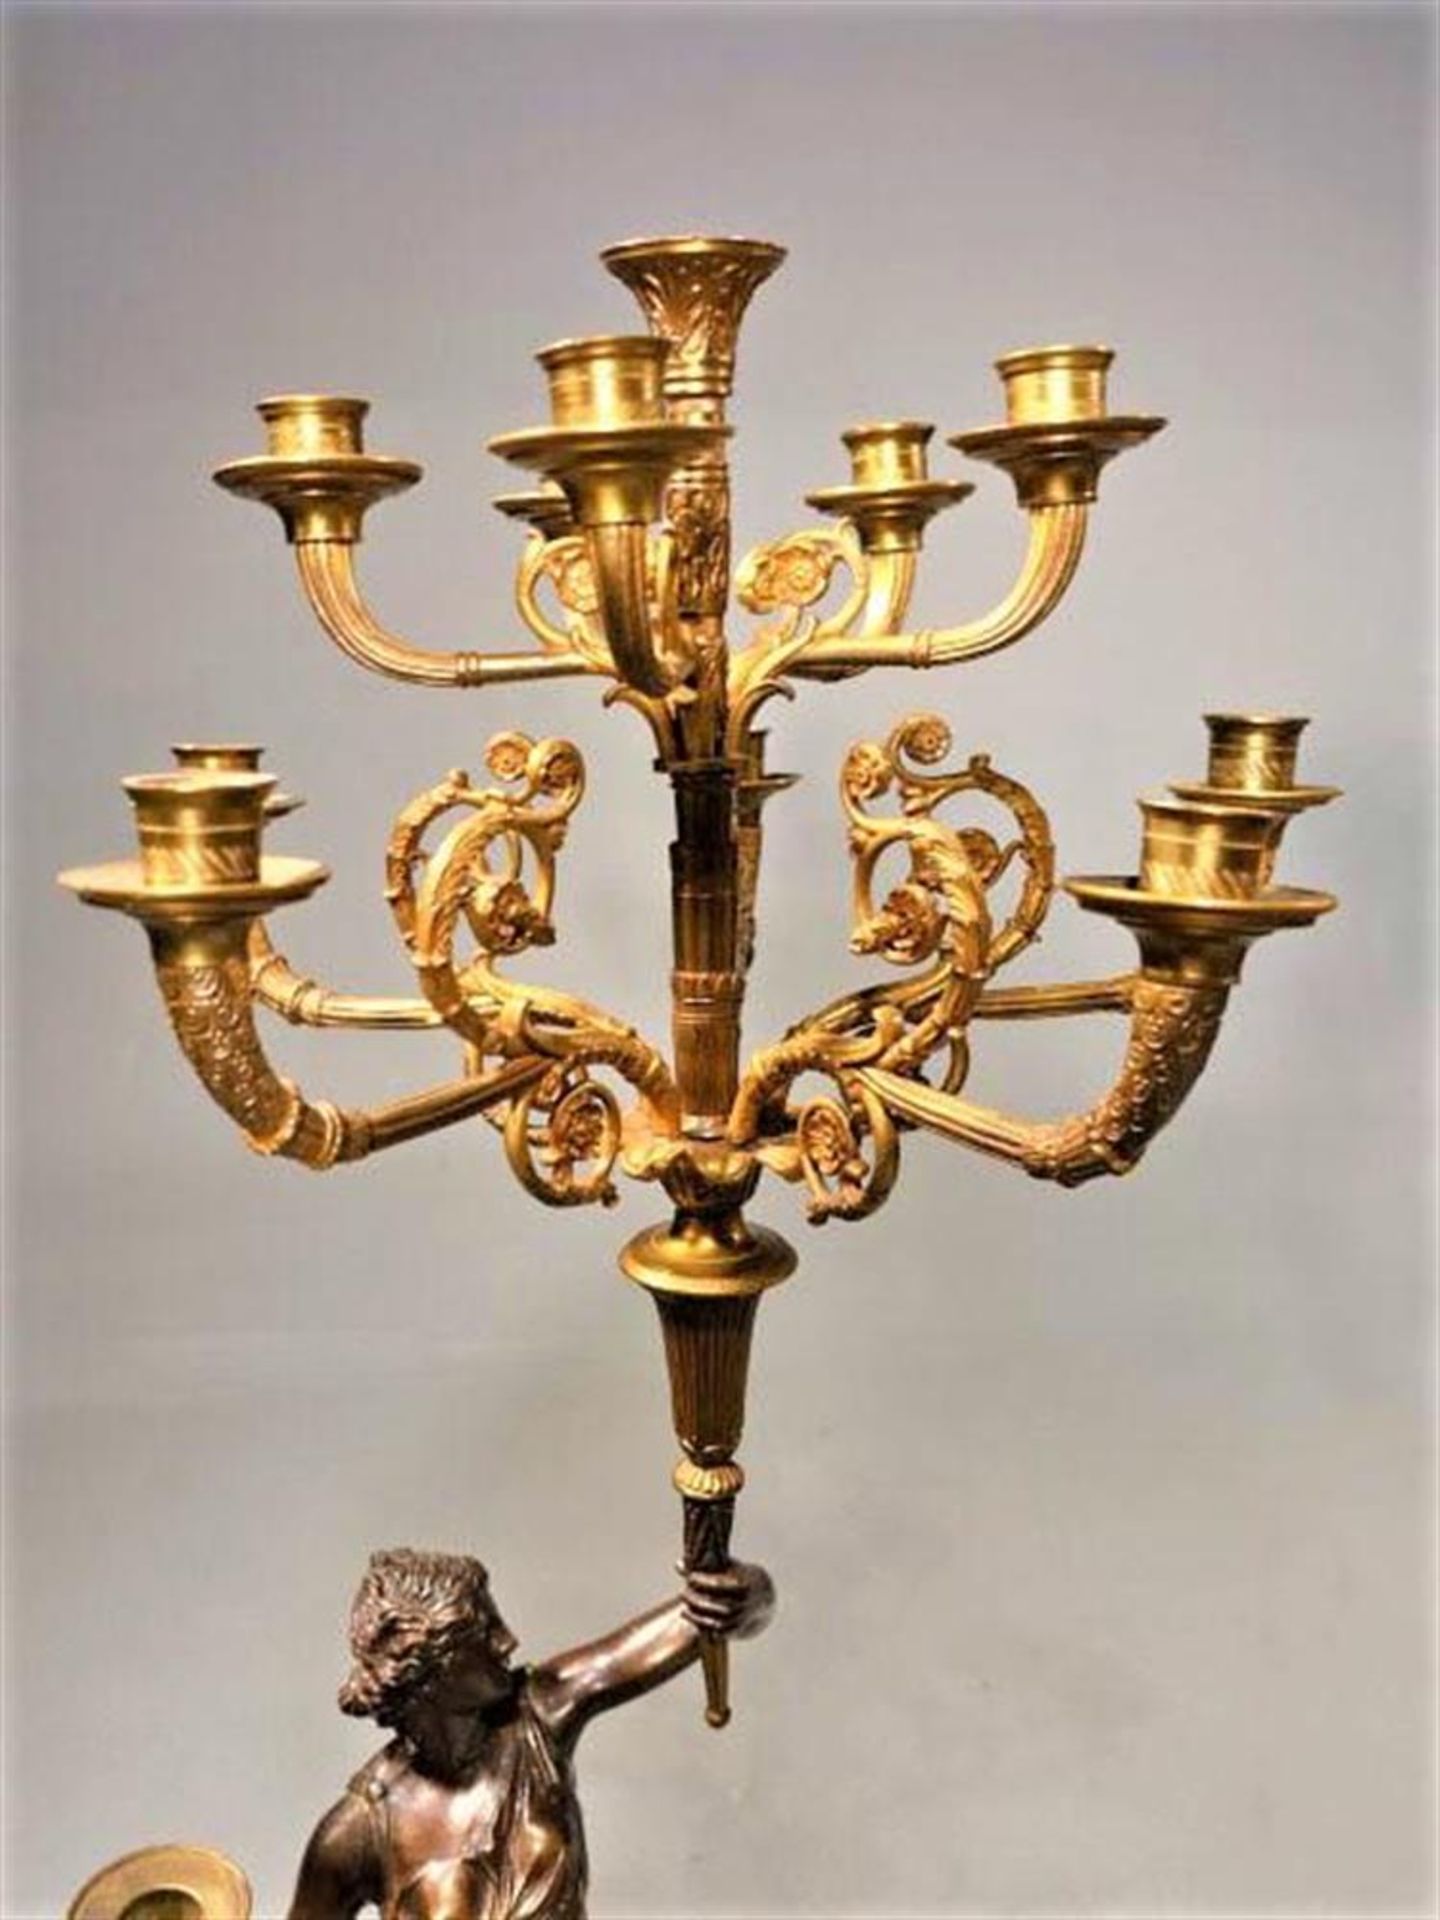 A LARGE PAIR OF BRONZE AND GILT BRONZE CANDELABRA, LATE 19TH CENTURY - Image 2 of 5